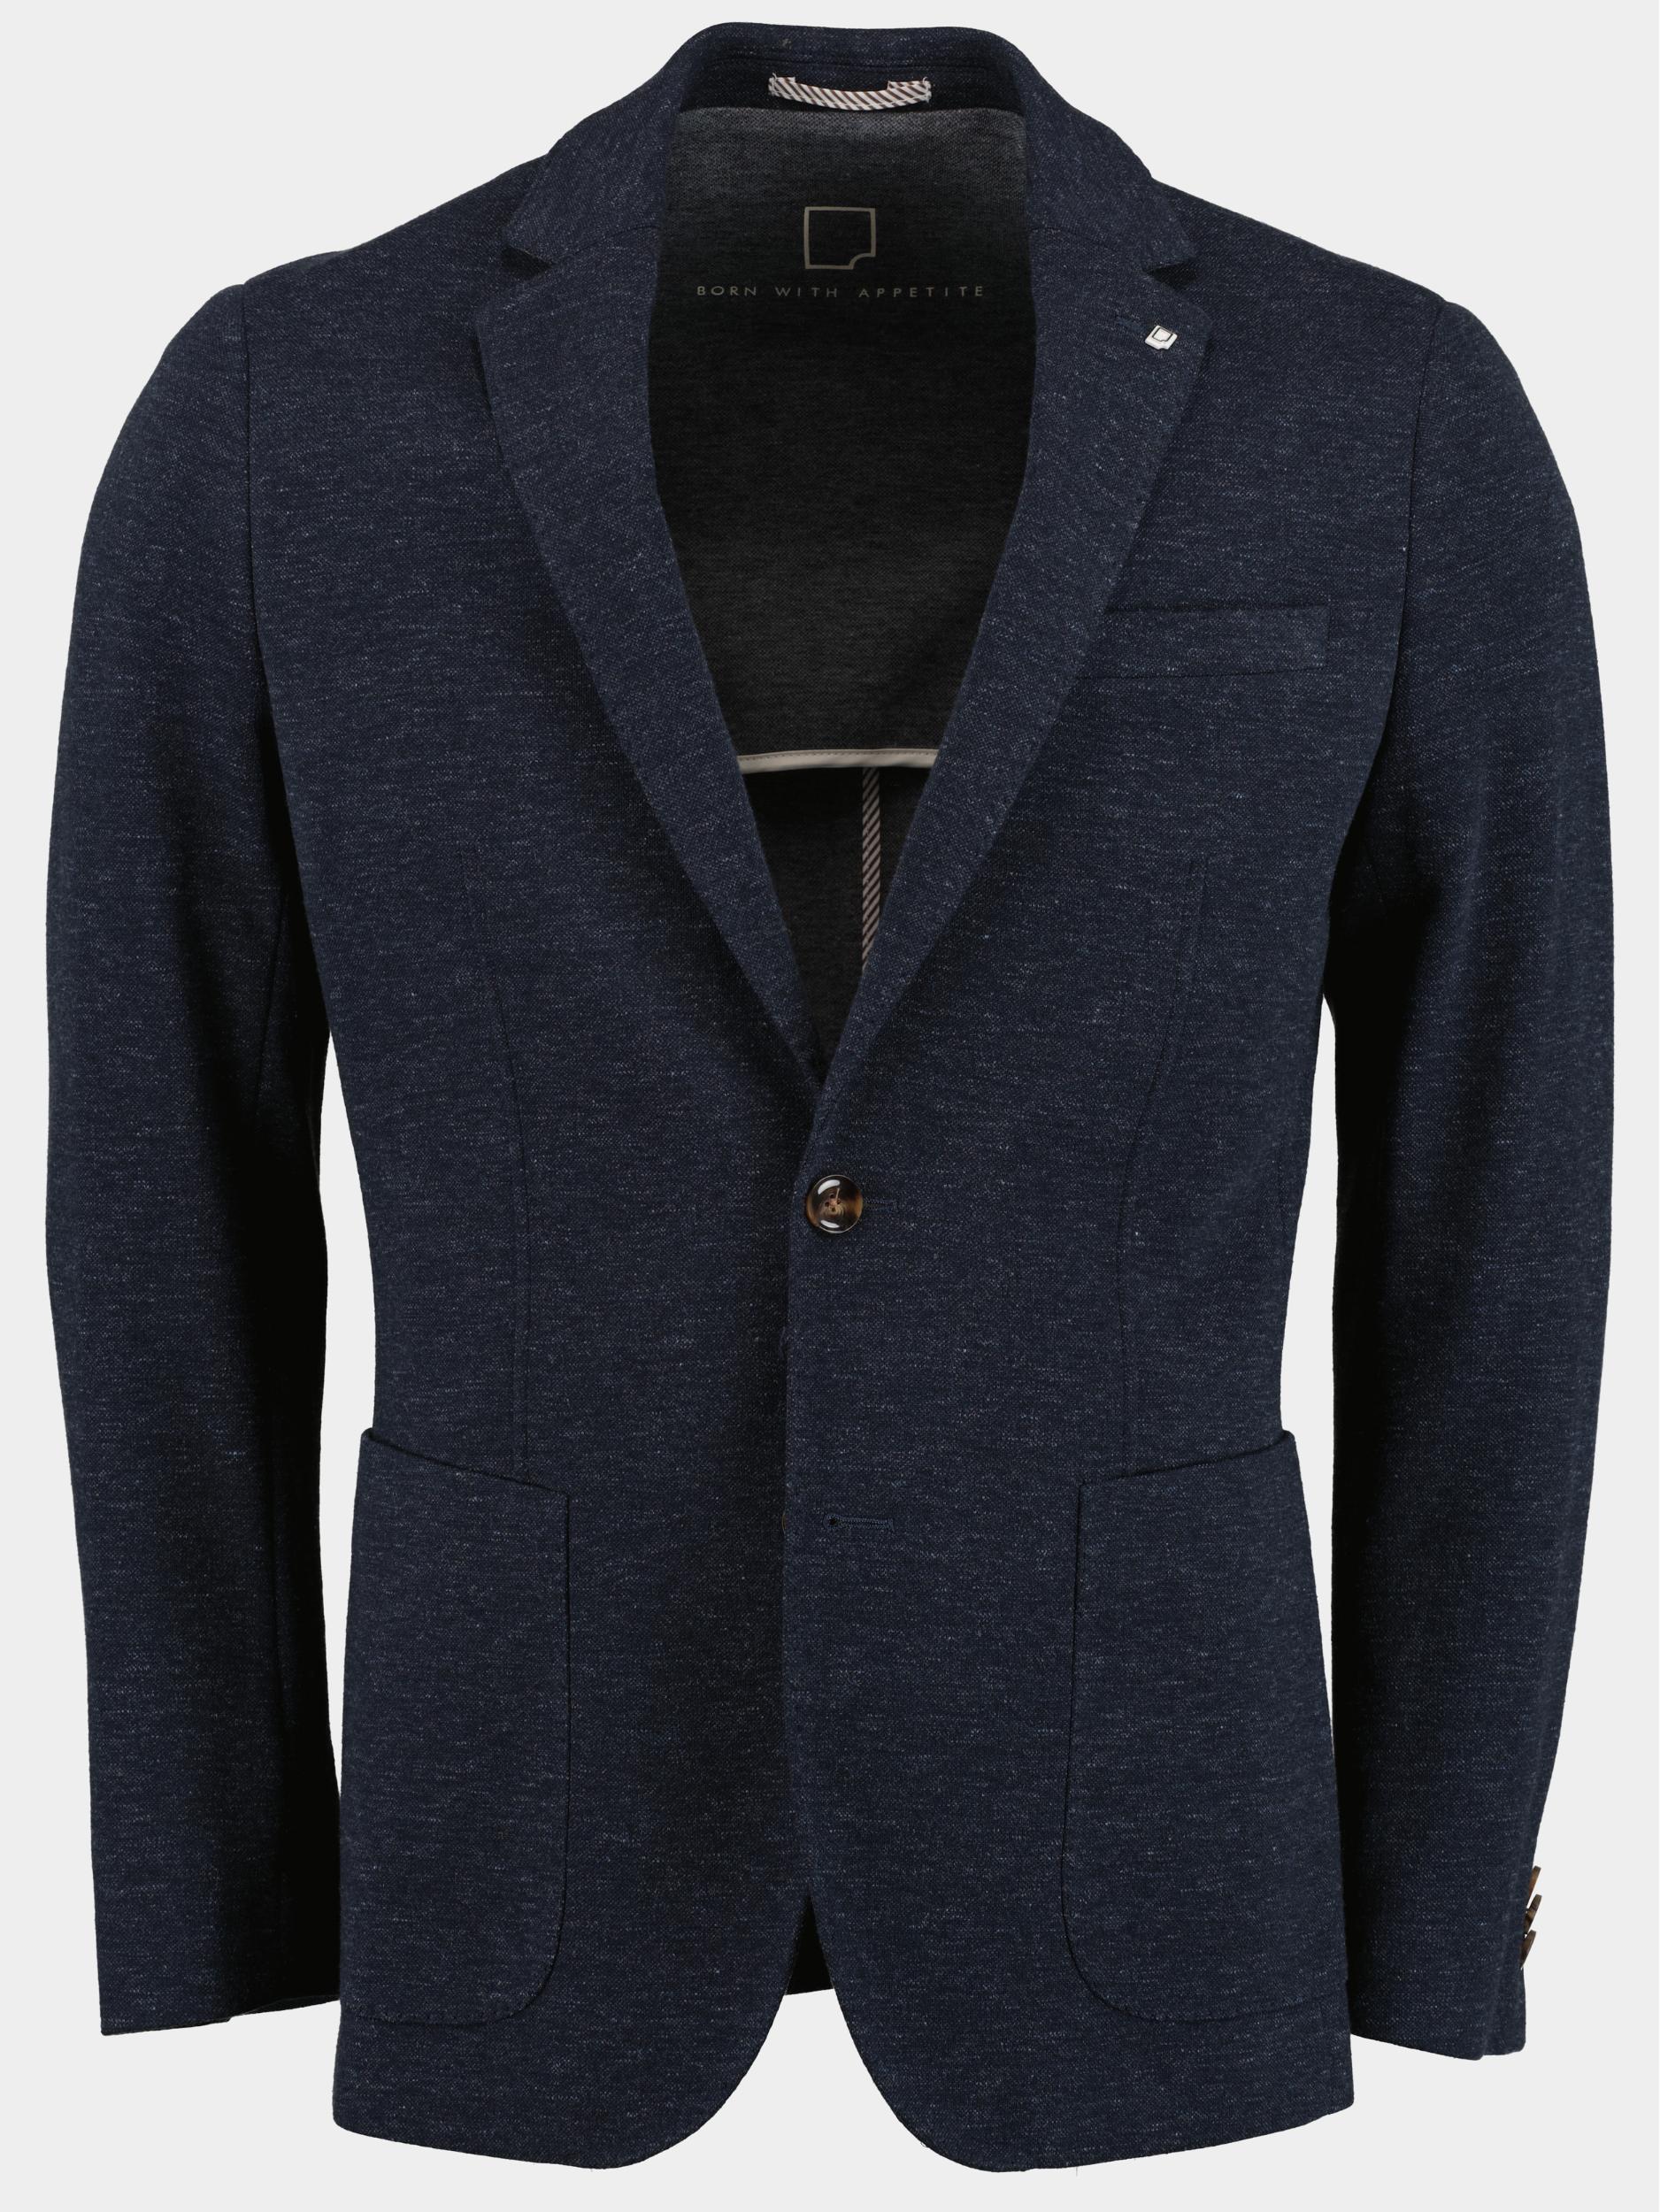 Born With Appetite Colbert Blauw D8 Fame Jacket 233038FA53/290 navy